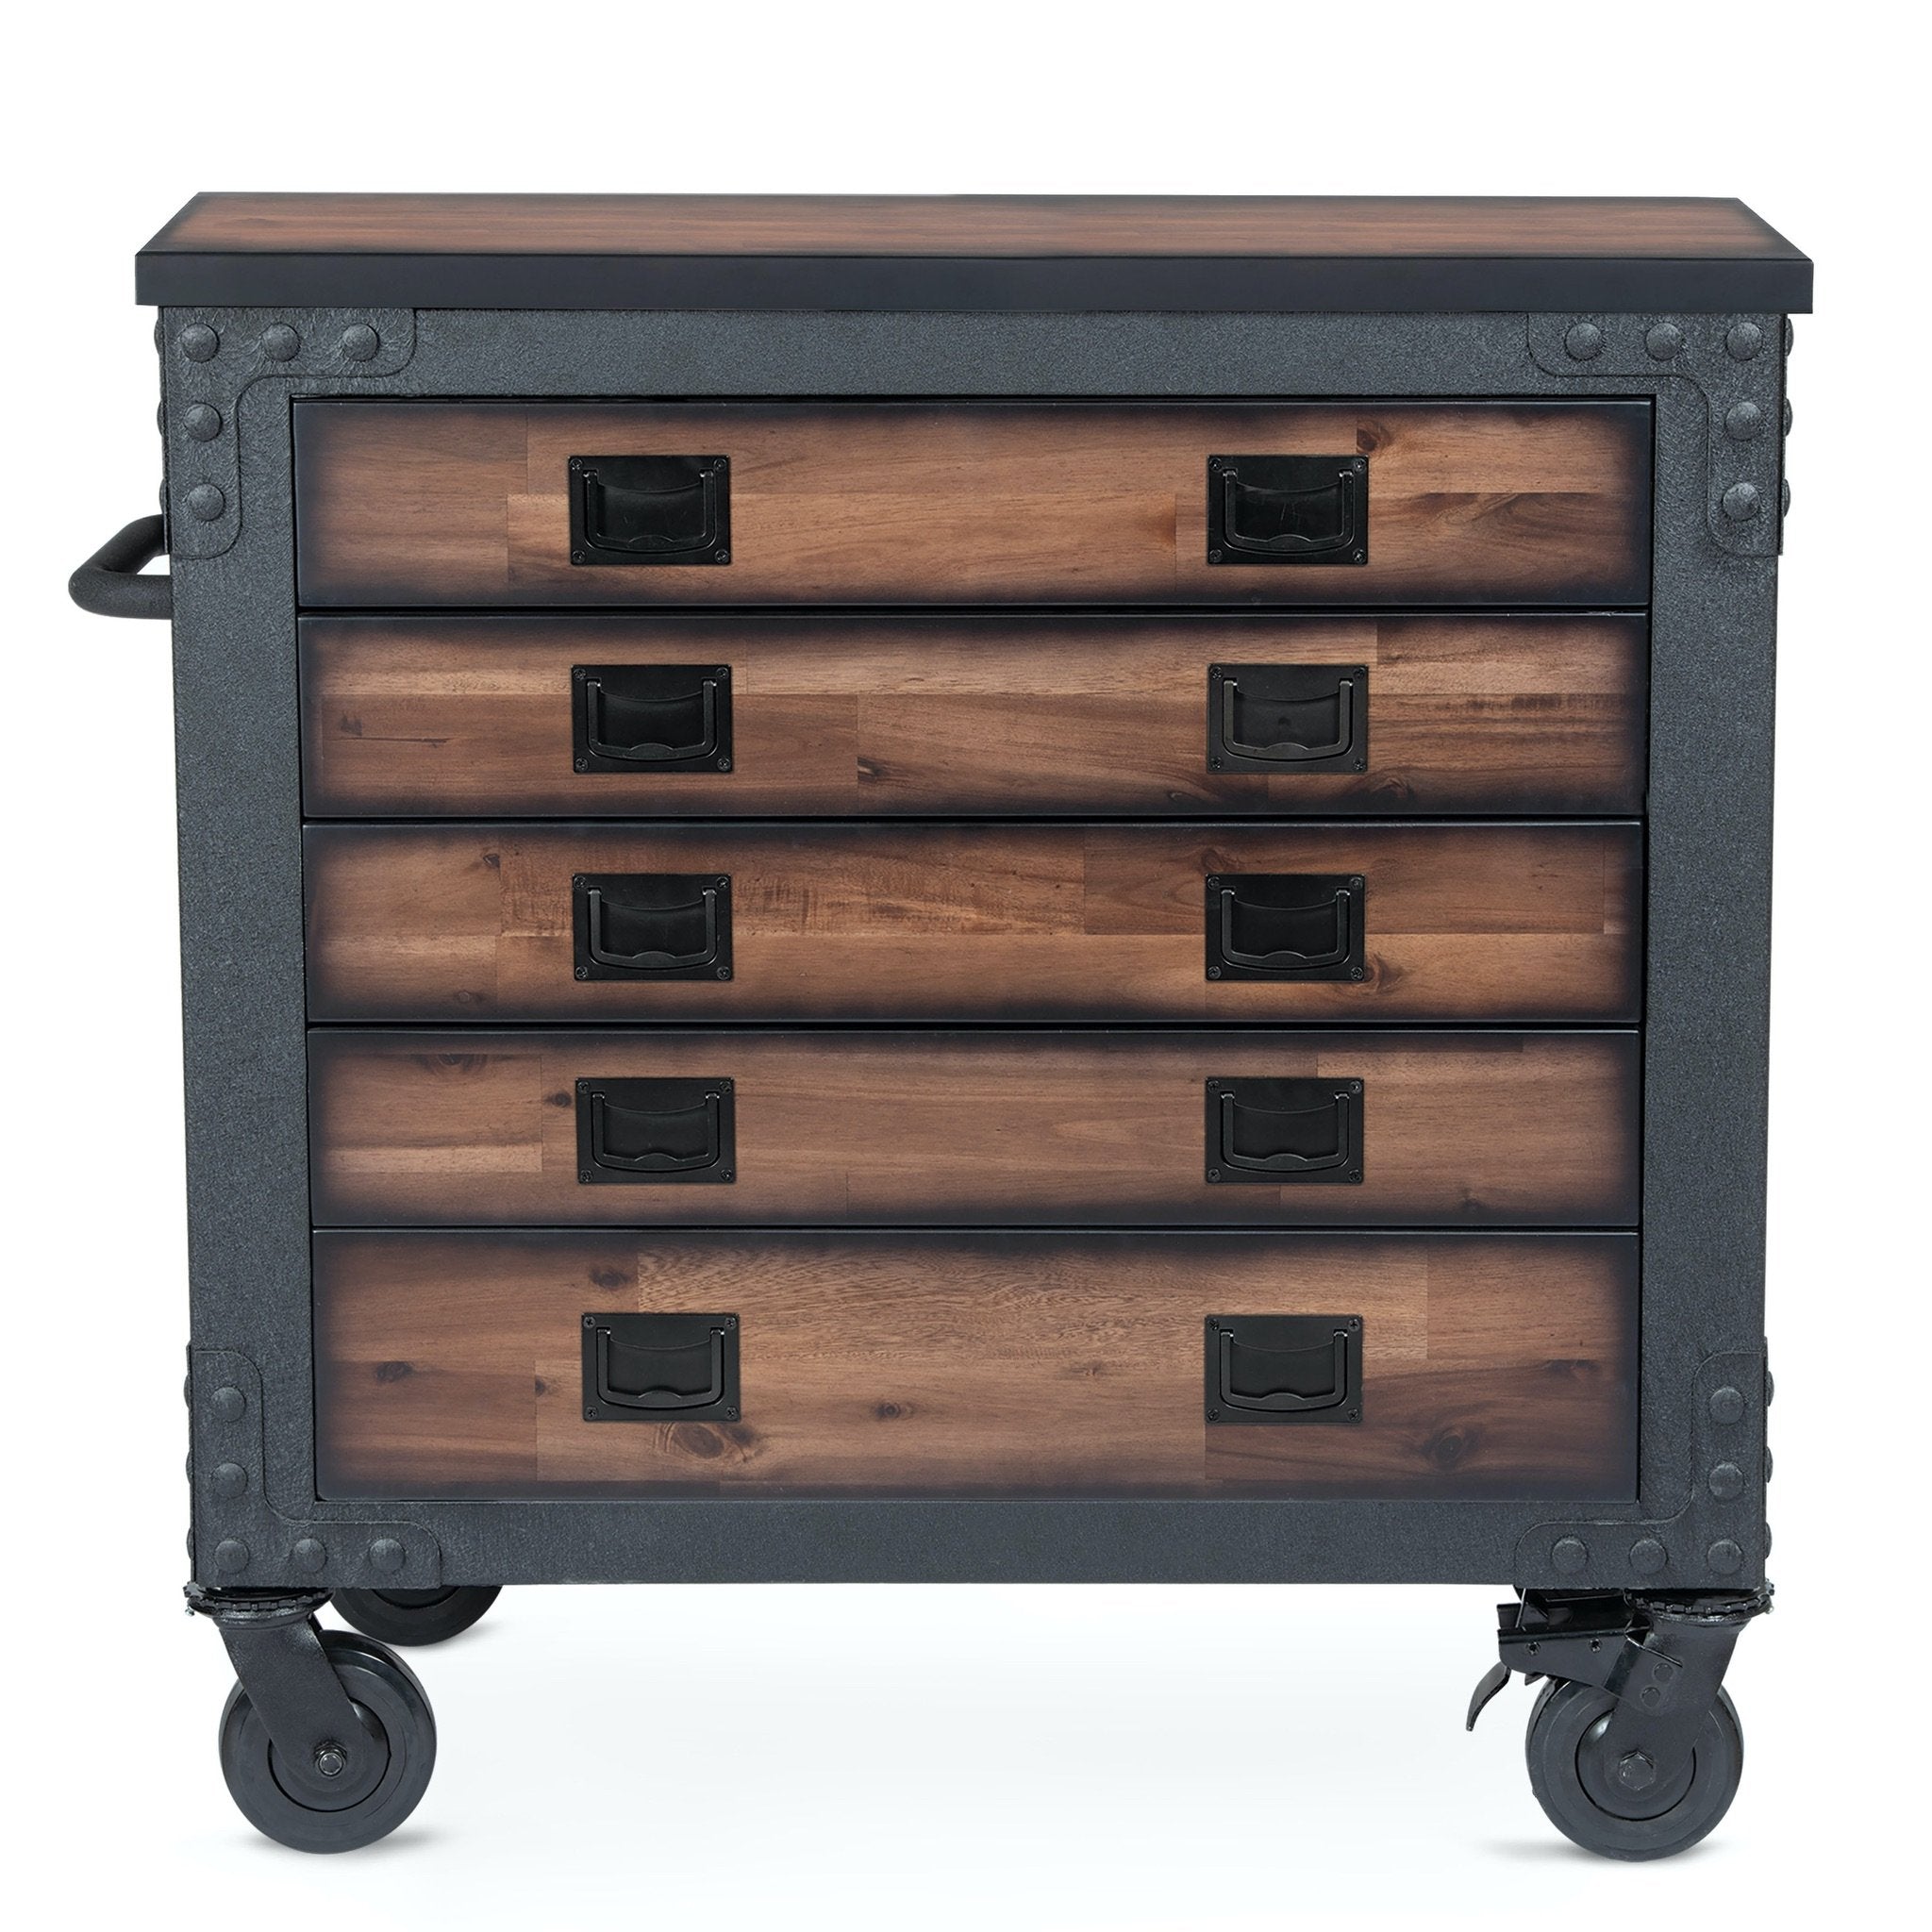 Duramax furniture Duramax 36 In. 5-Drawers Rolling Tool Chest with Wood Top